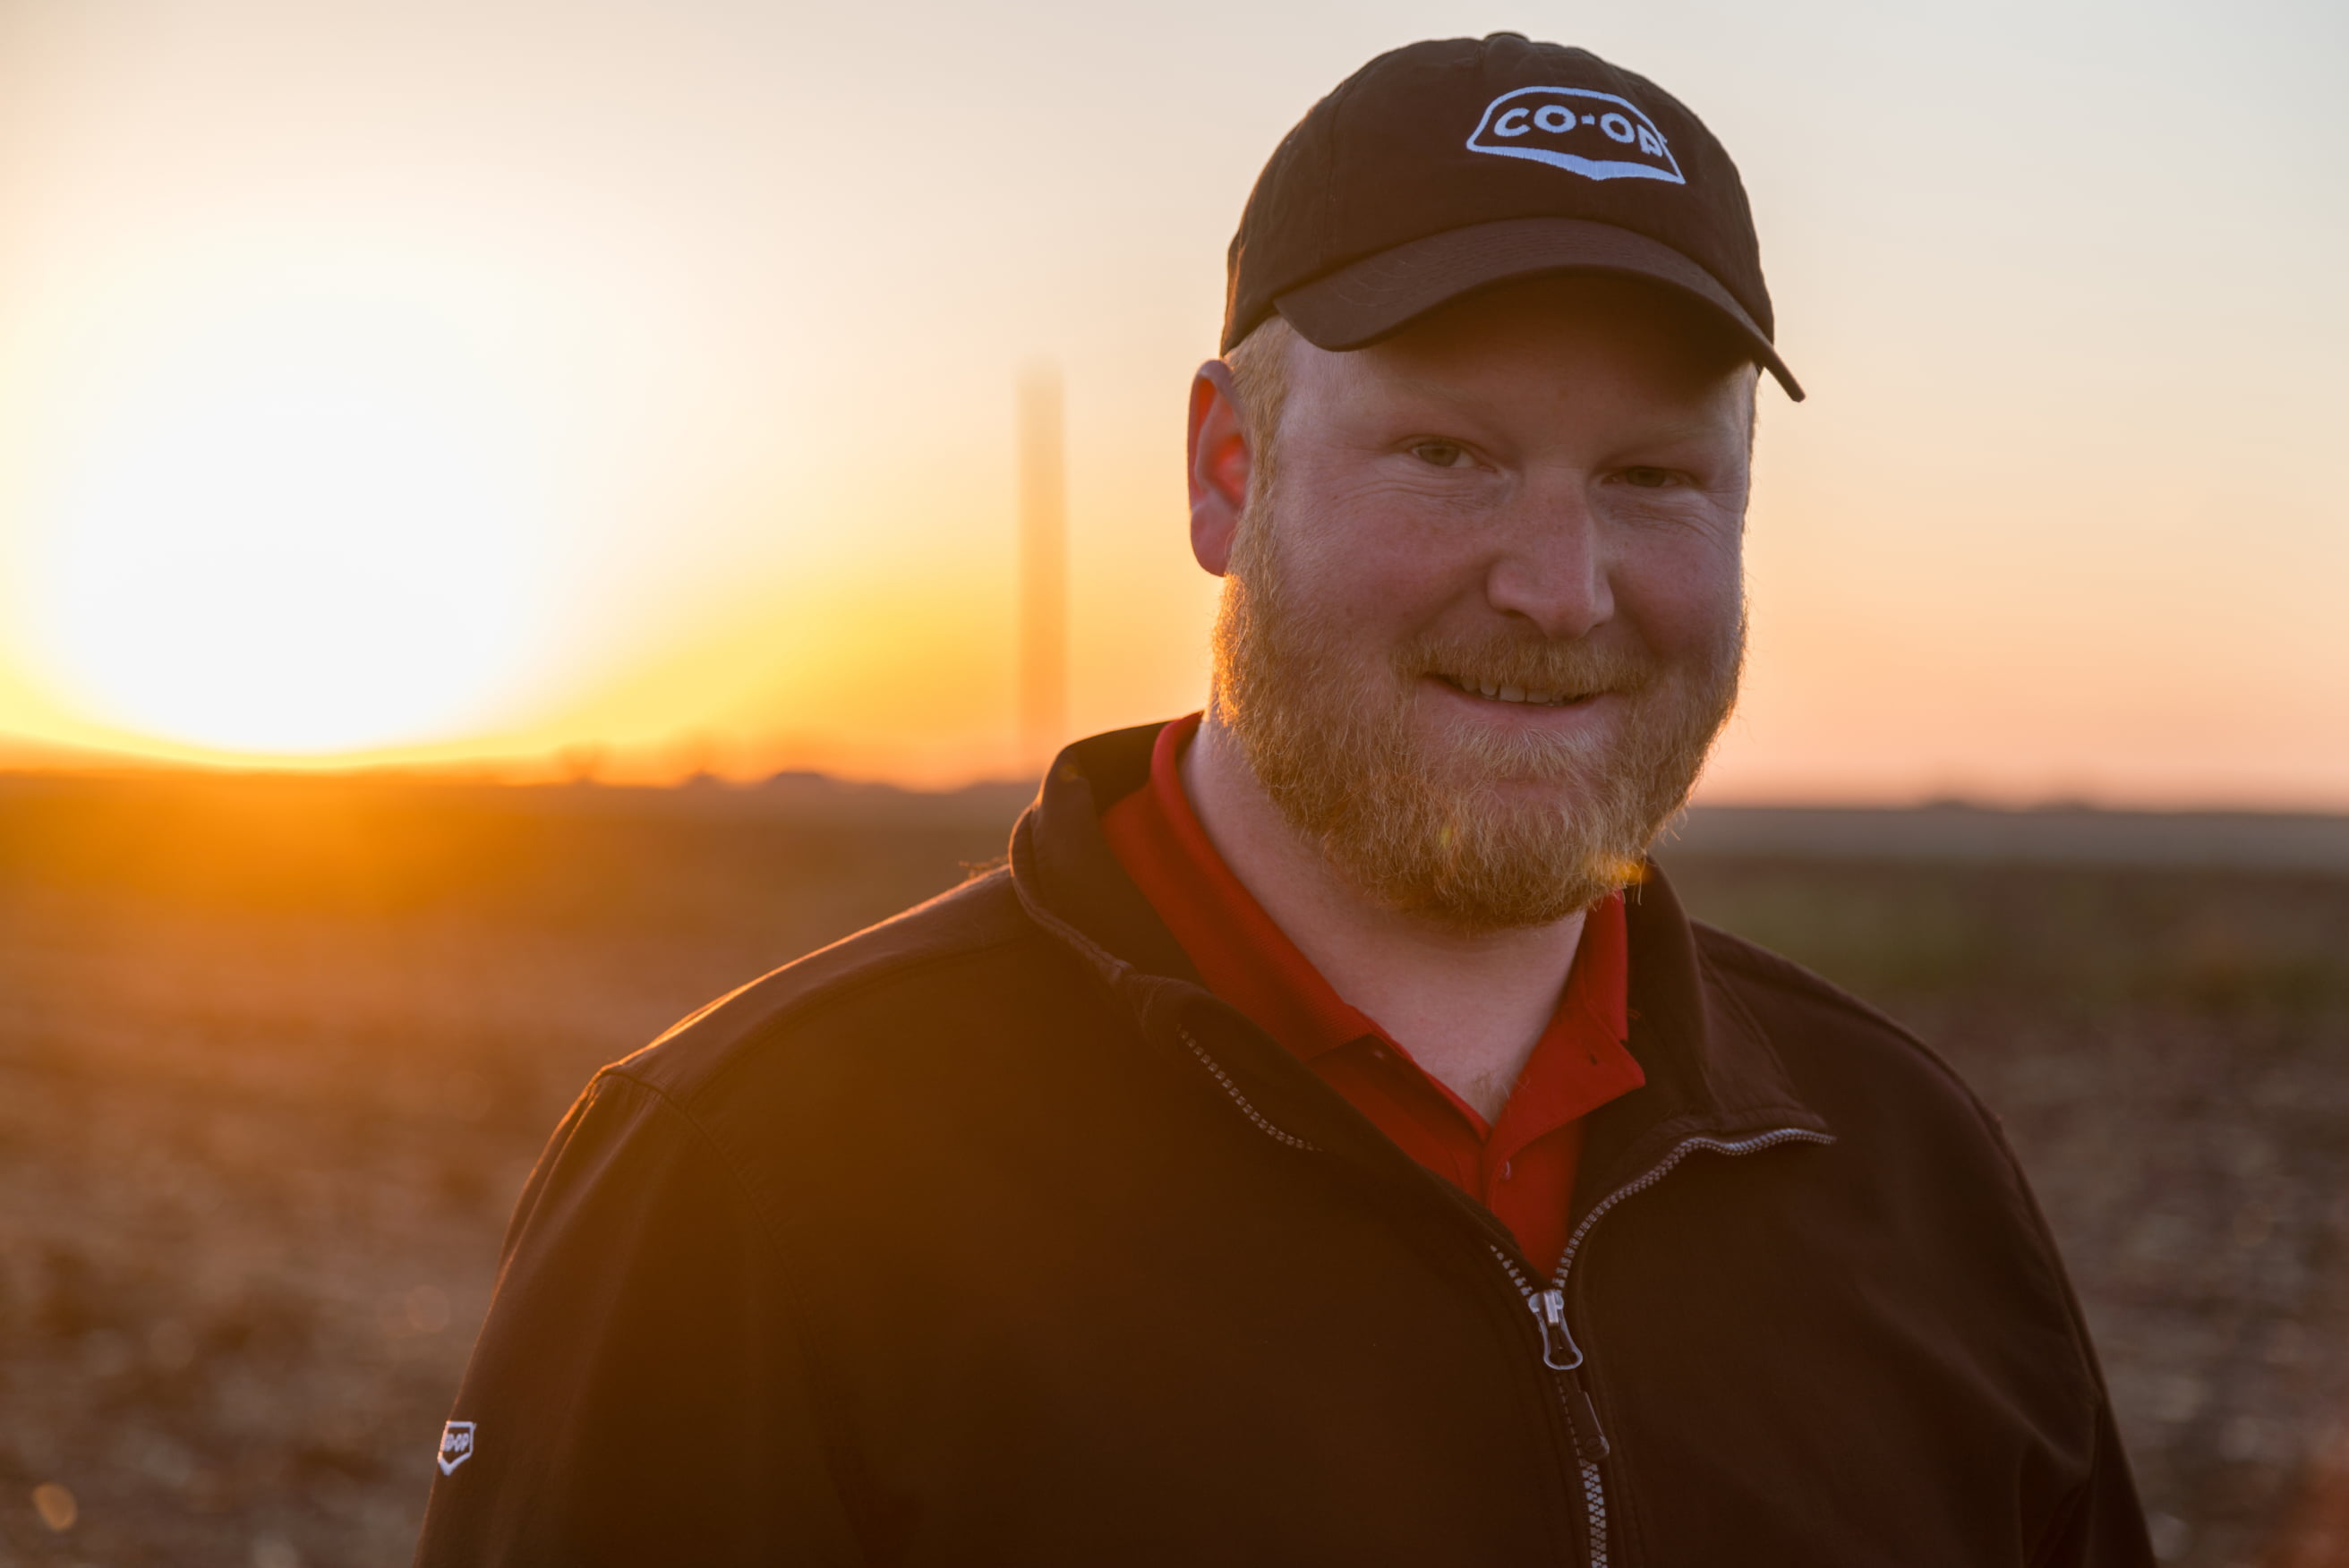 Man with a Co-op ball cap in a field, smiling at the camera with a sunset in the background.